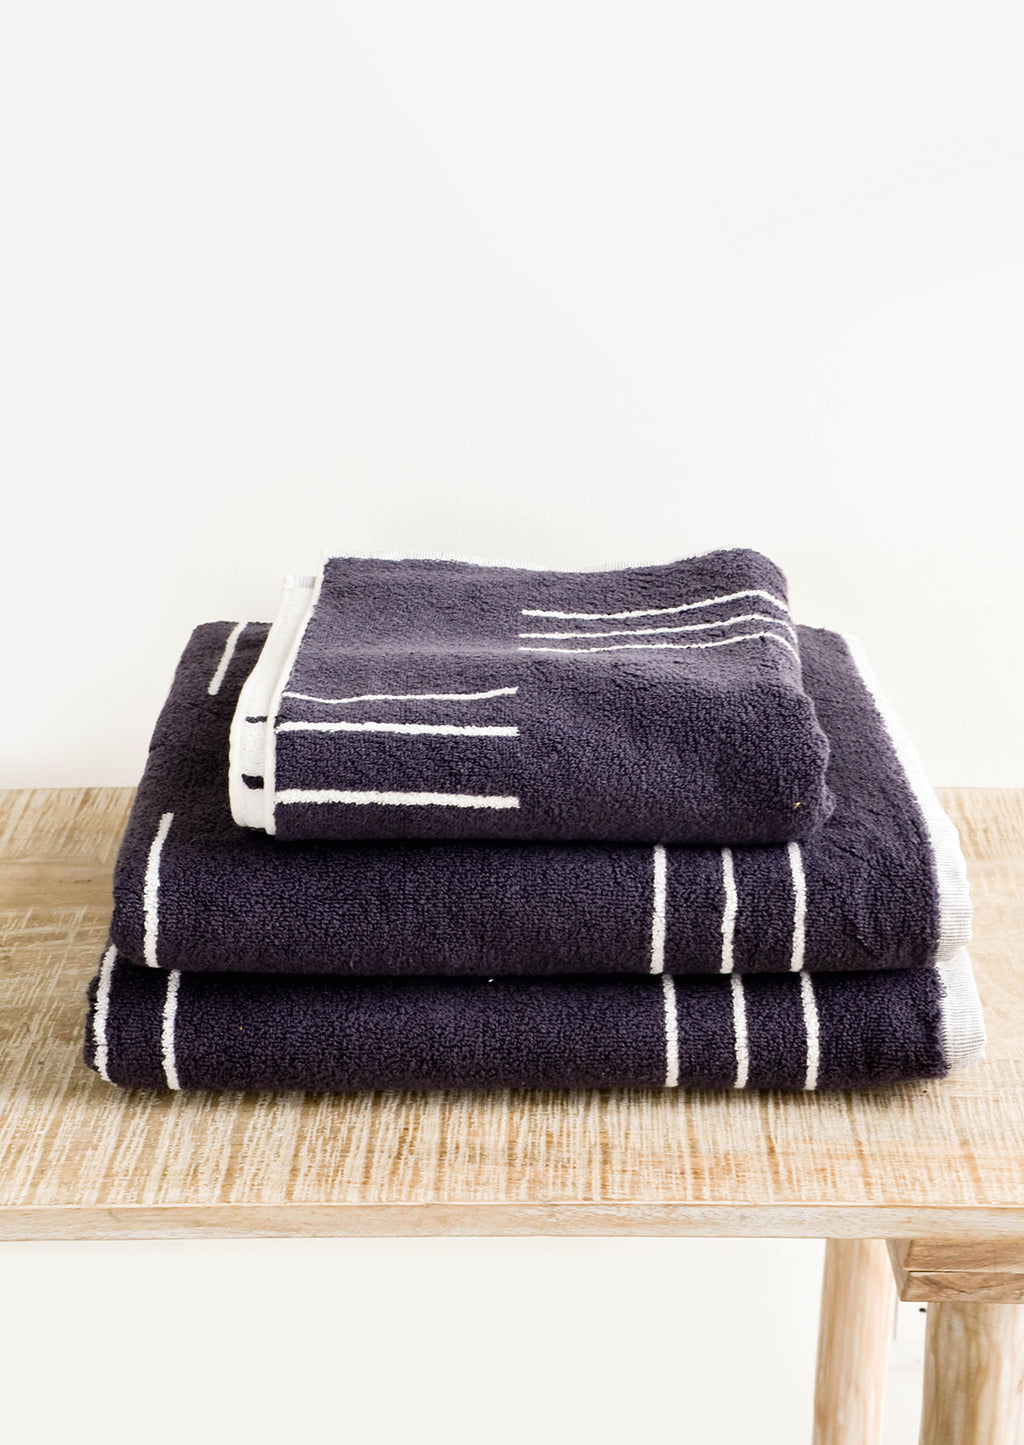 3: Set of terrycloth towels in dark grey with modern white line print